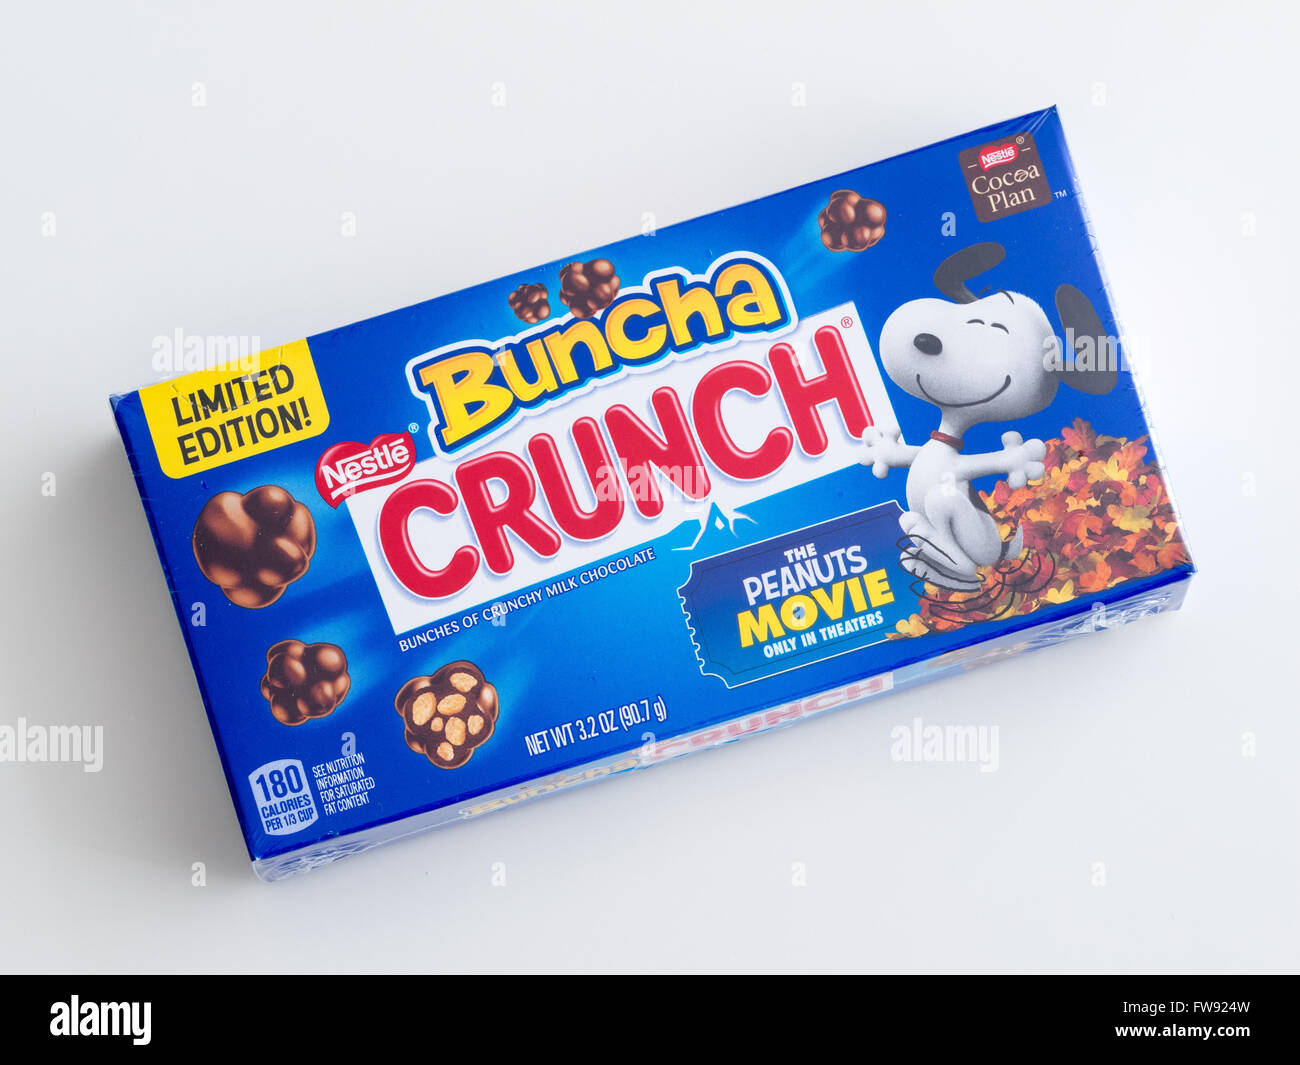 A theatre box of Nestlé Buncha Crunch candy. Limited edition Peanuts Movie (Snoopy) box shown. Stock Photo